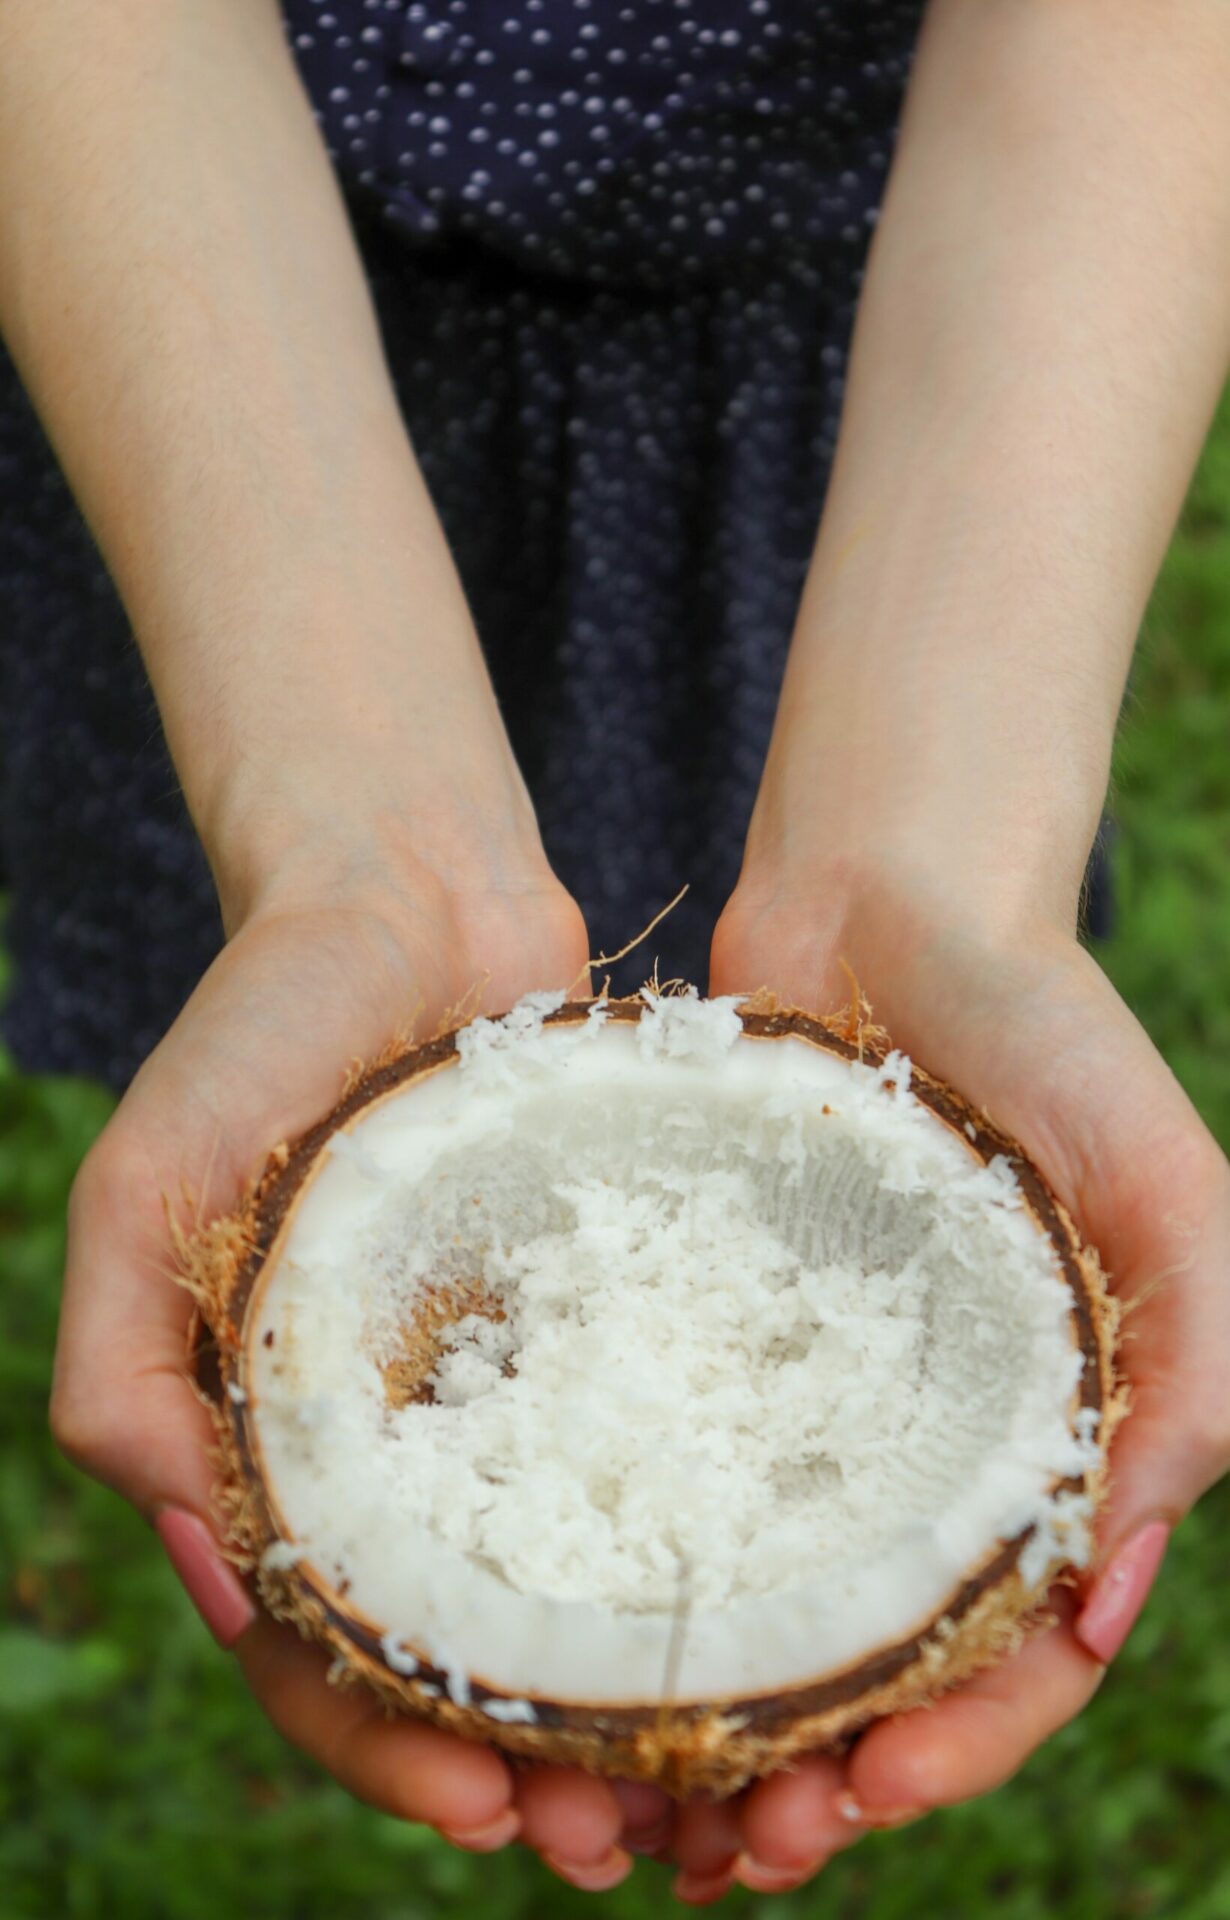 How to Tell if Your Shredded Coconut Has Gone Bad?